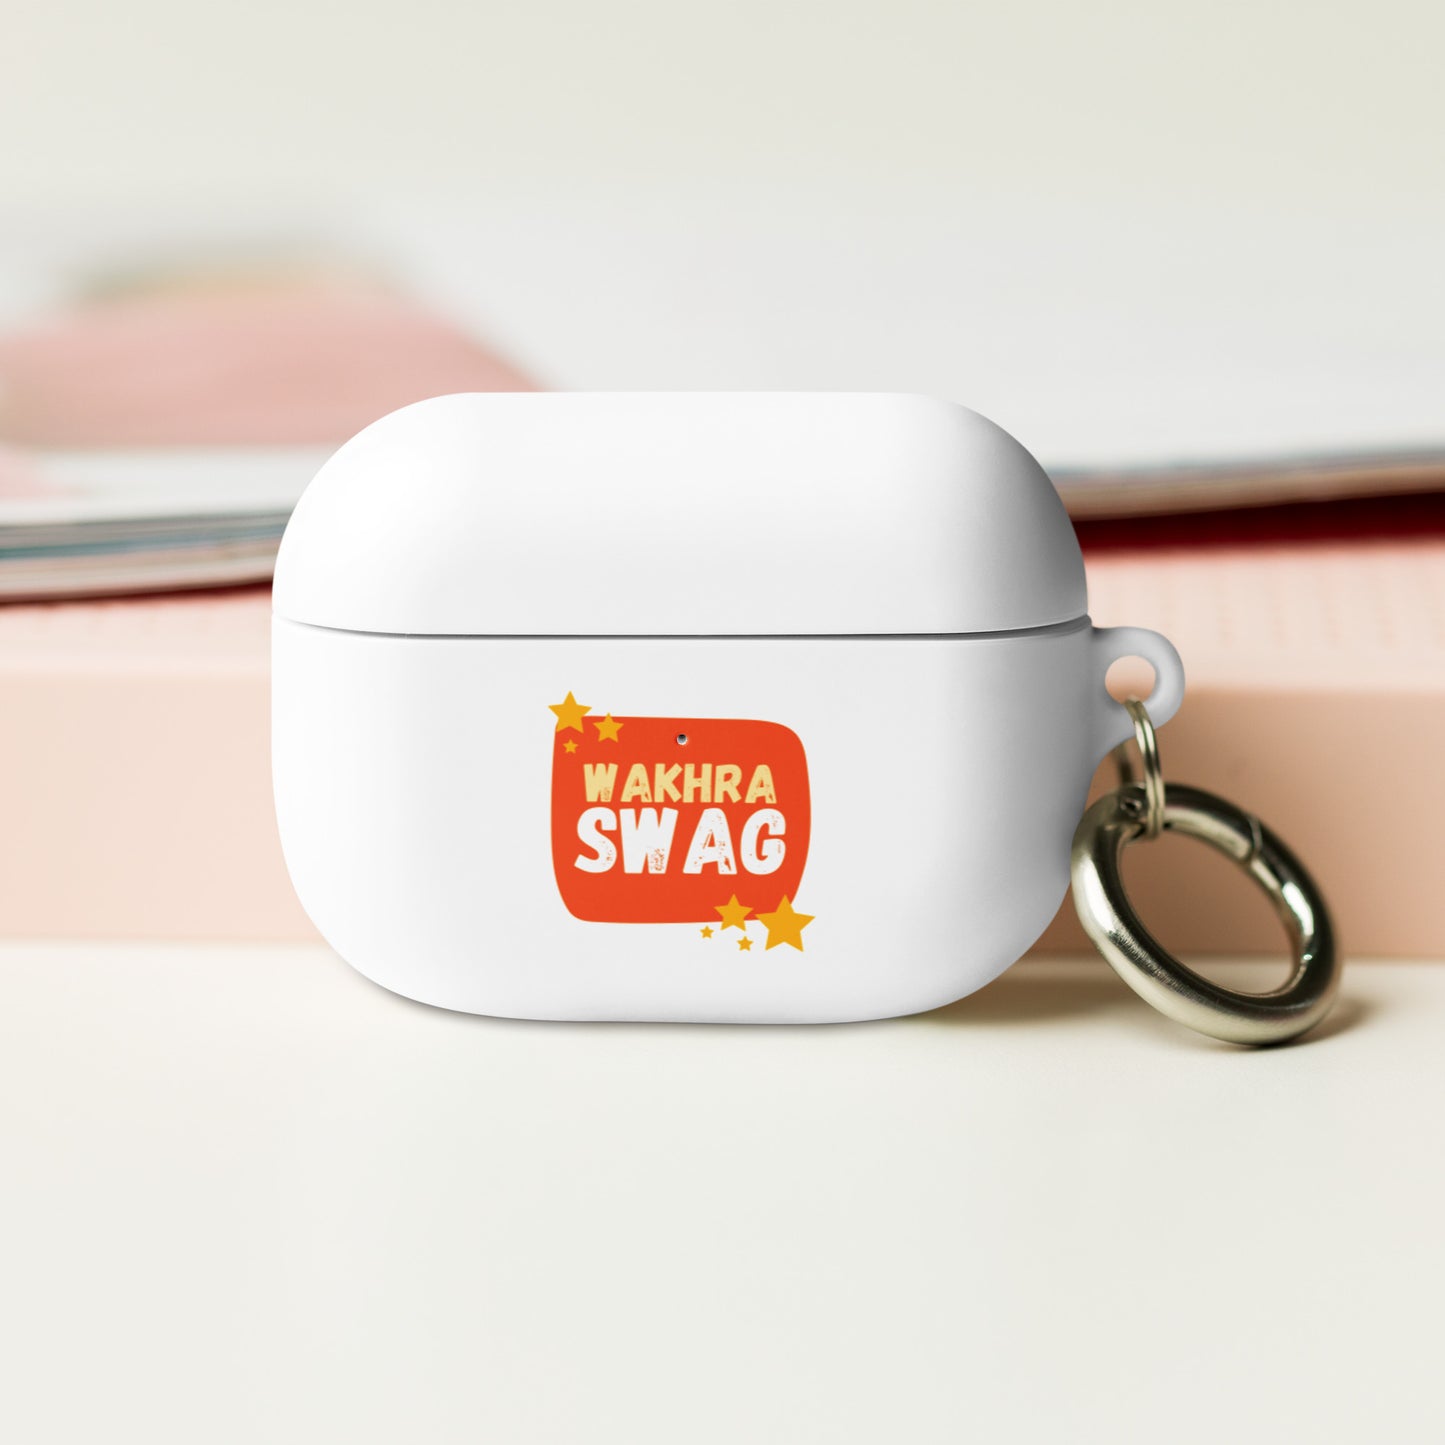 Wakhra Swag - AirPods case